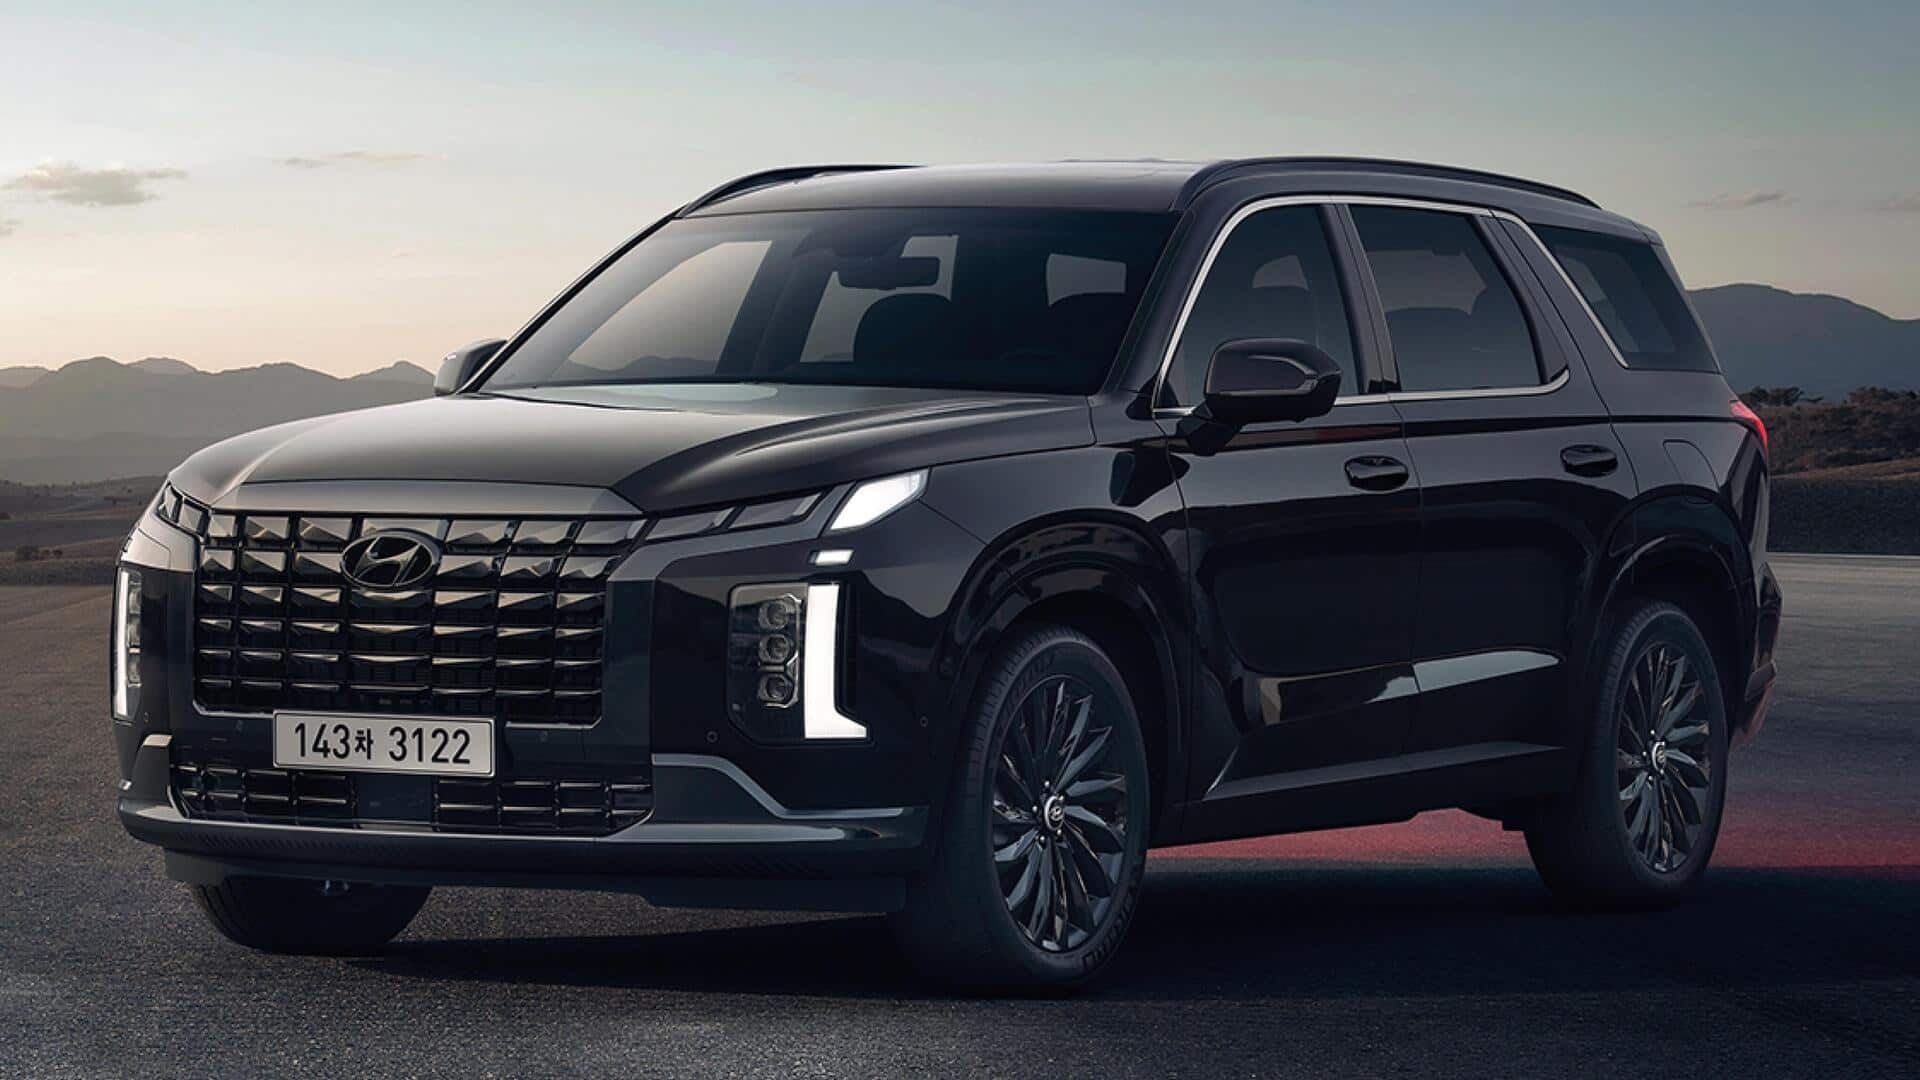 Hyundai Palisade gets a Night Edition treatment: Check features